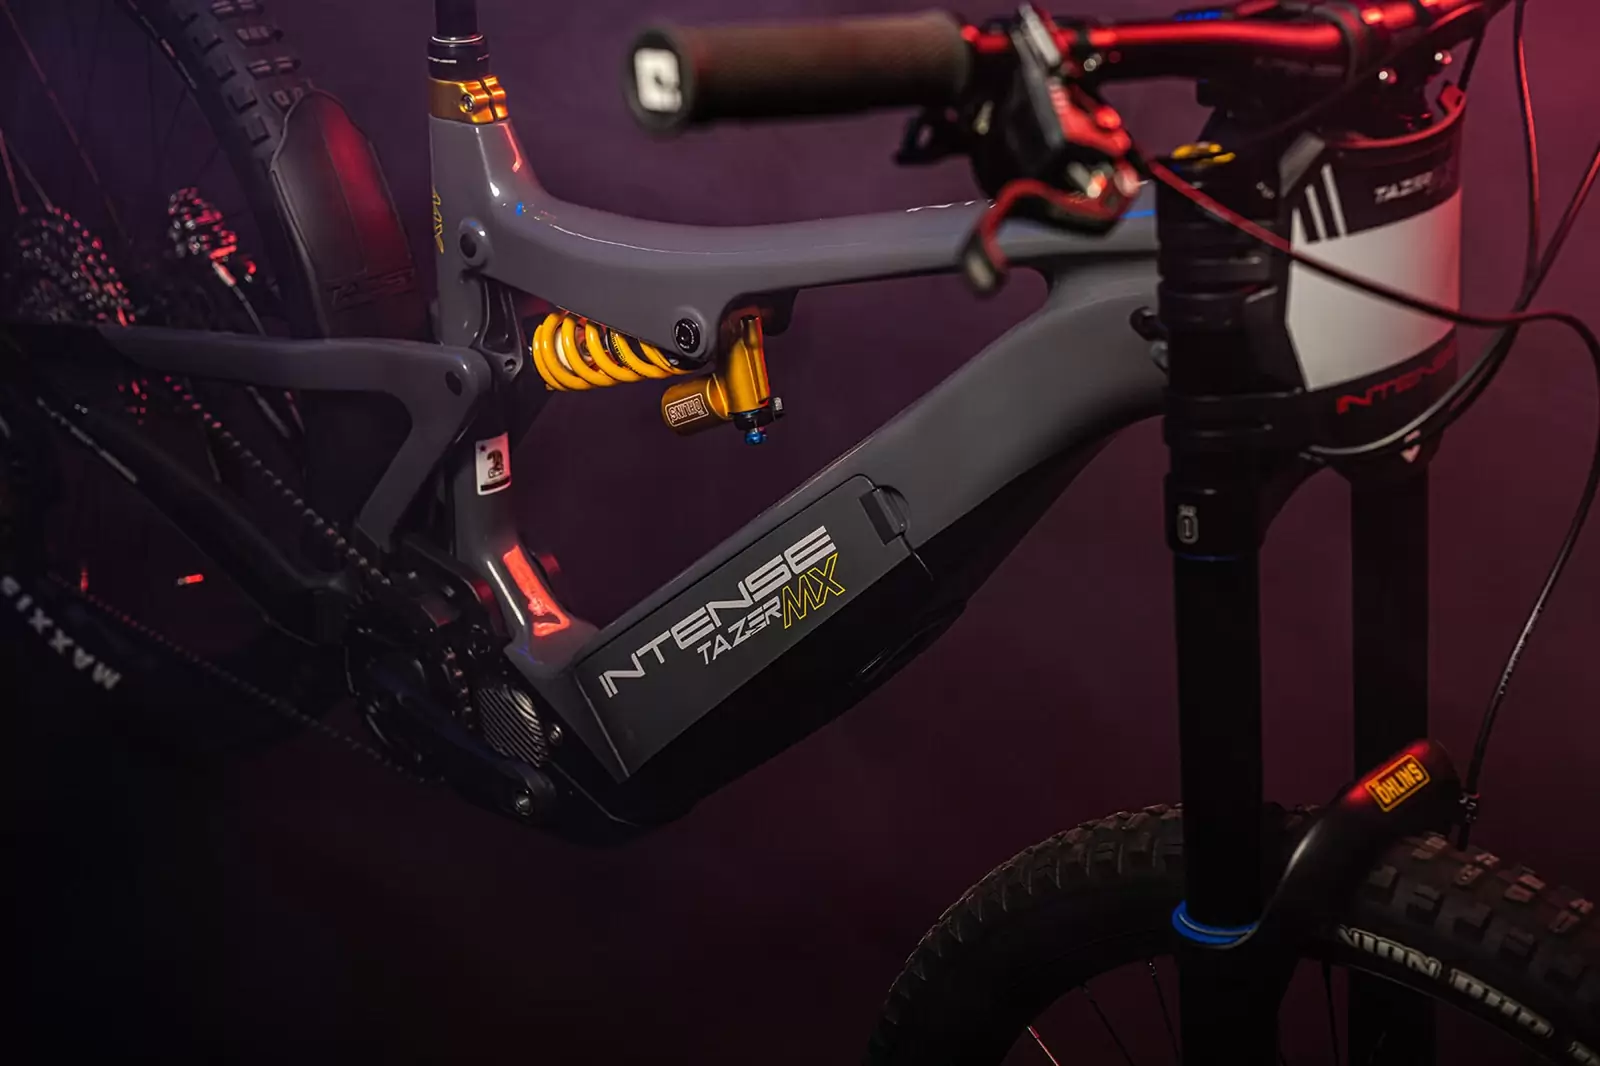 INTENSE e-bikes are available on Ridewill - image